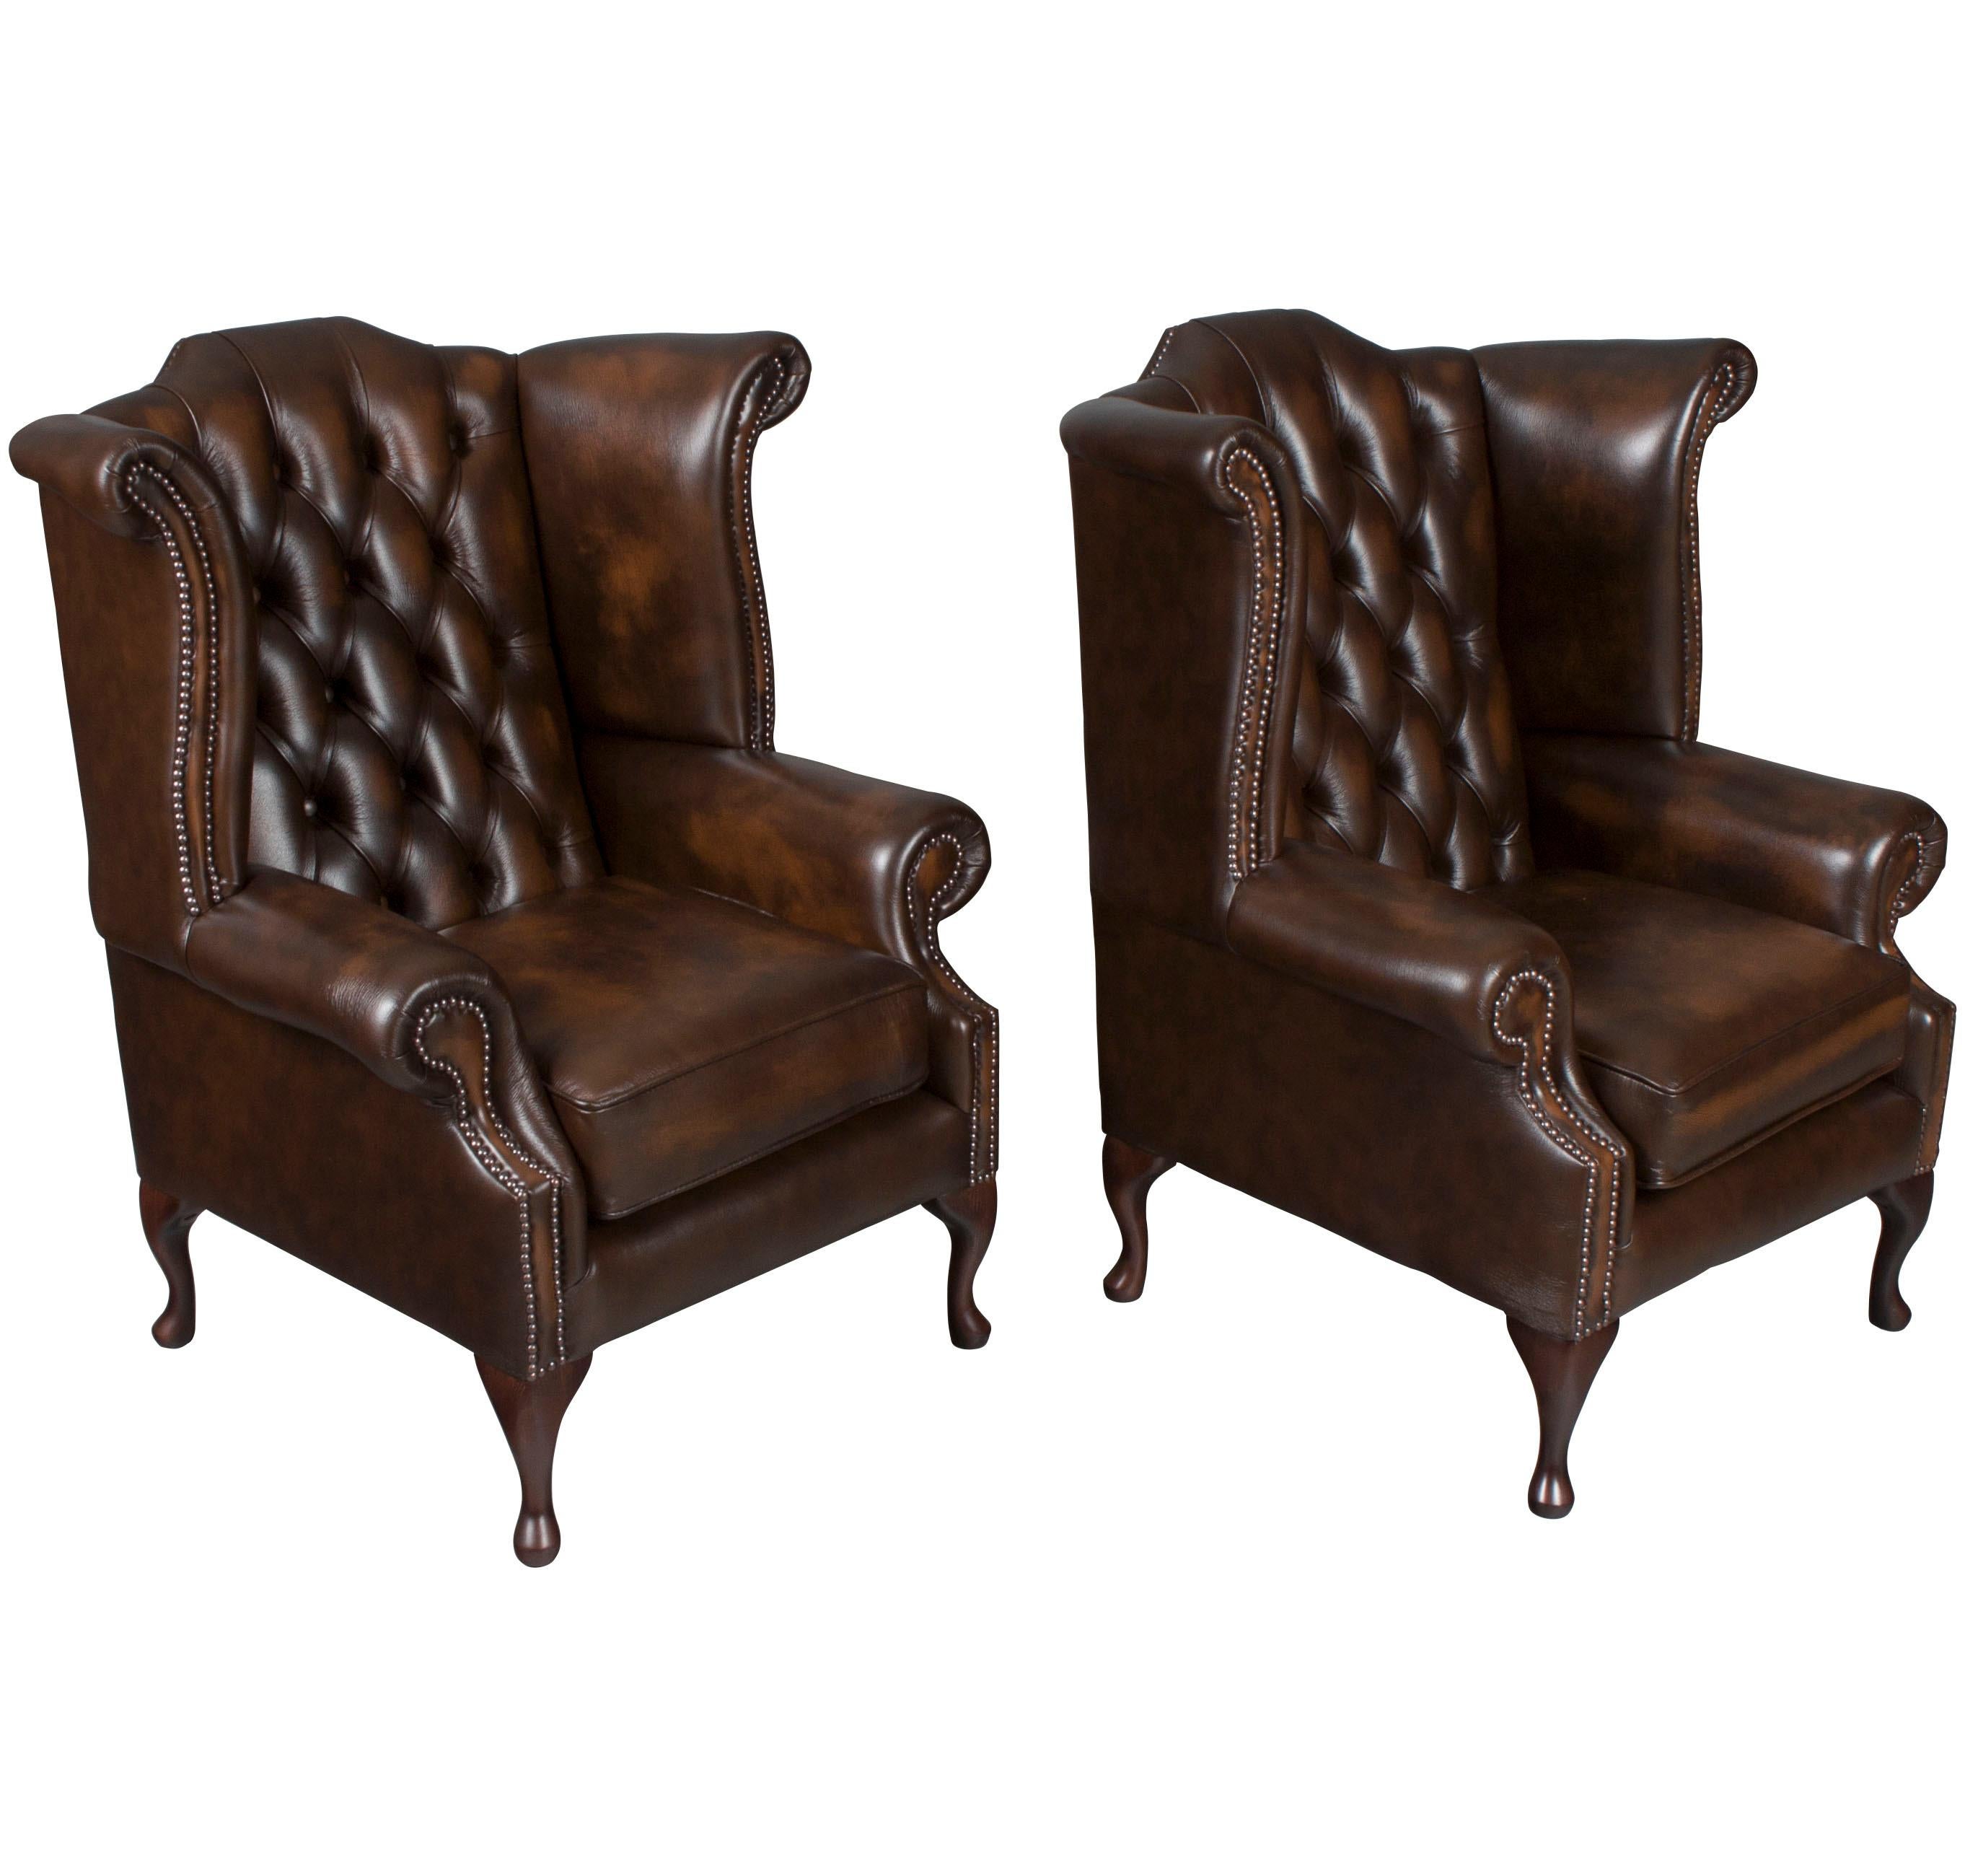 This is a brand new set of hand made tufted leather wing back arm chairs from England. 

The brown tufted leather used is a genuine, semi-aniline dyed leather. The maker expertly antiques it to provide an aged look with lighter tones on the raised